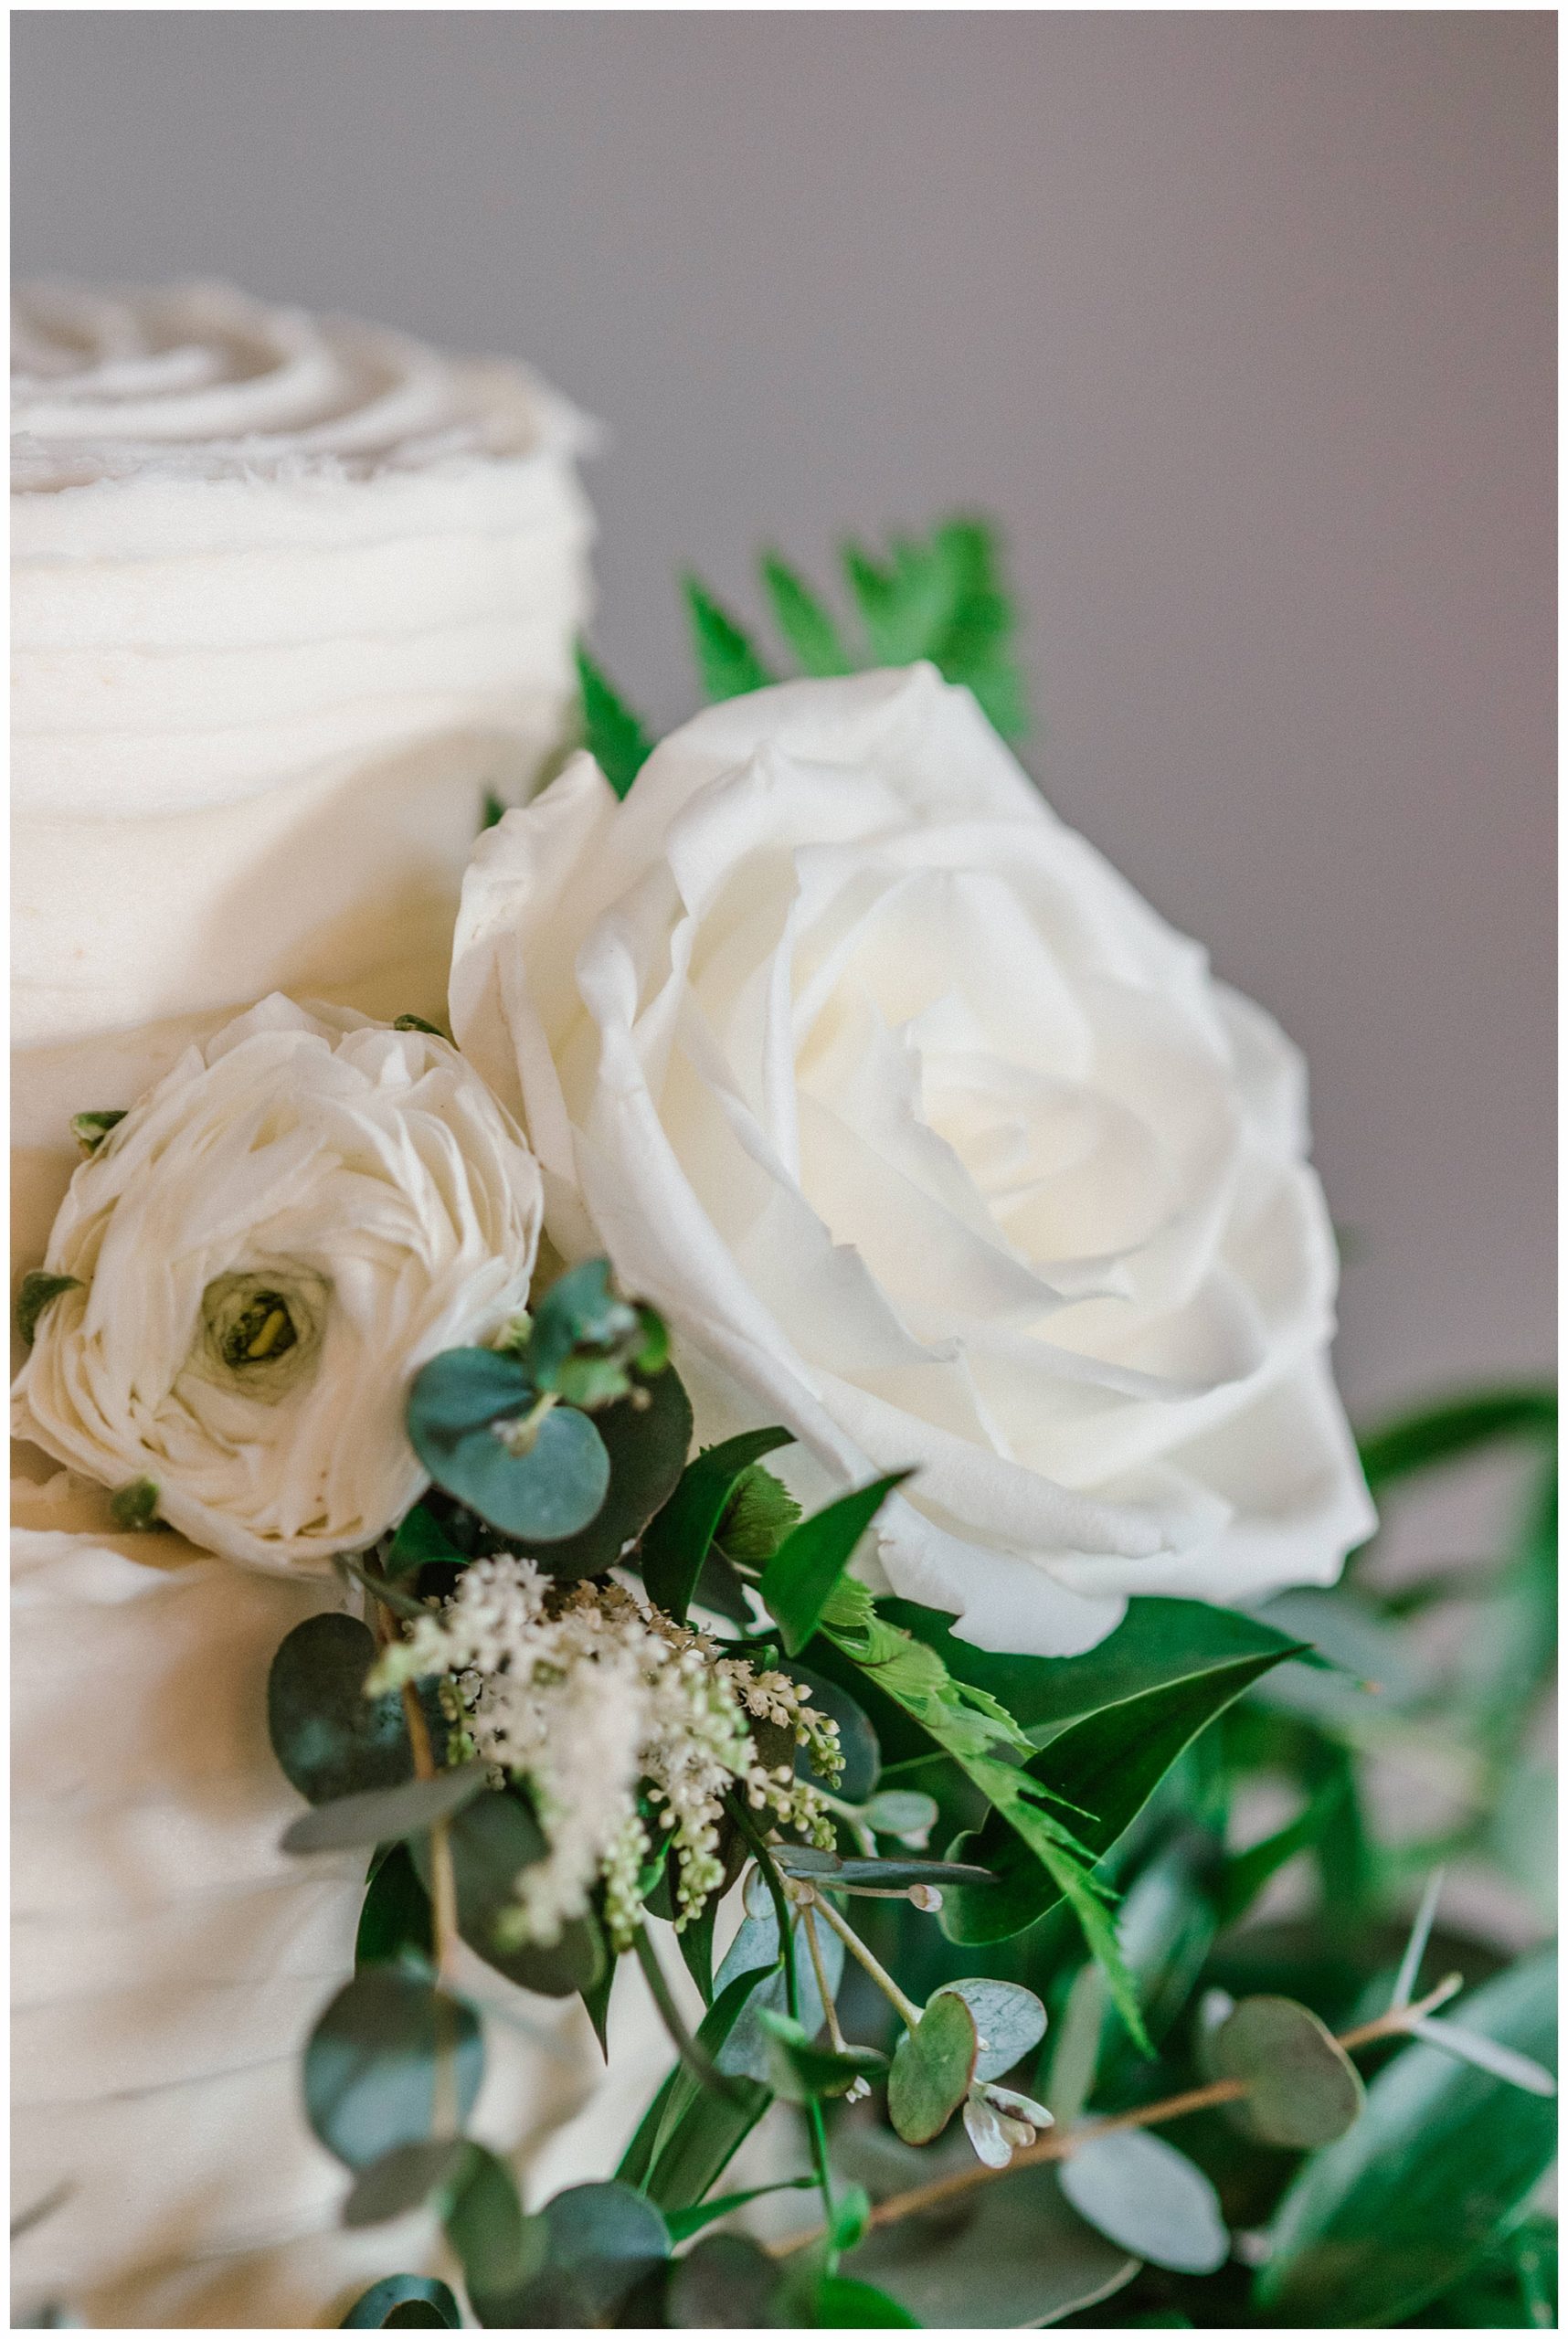 Close up of Floral Decoration on Classic Wedding Cake